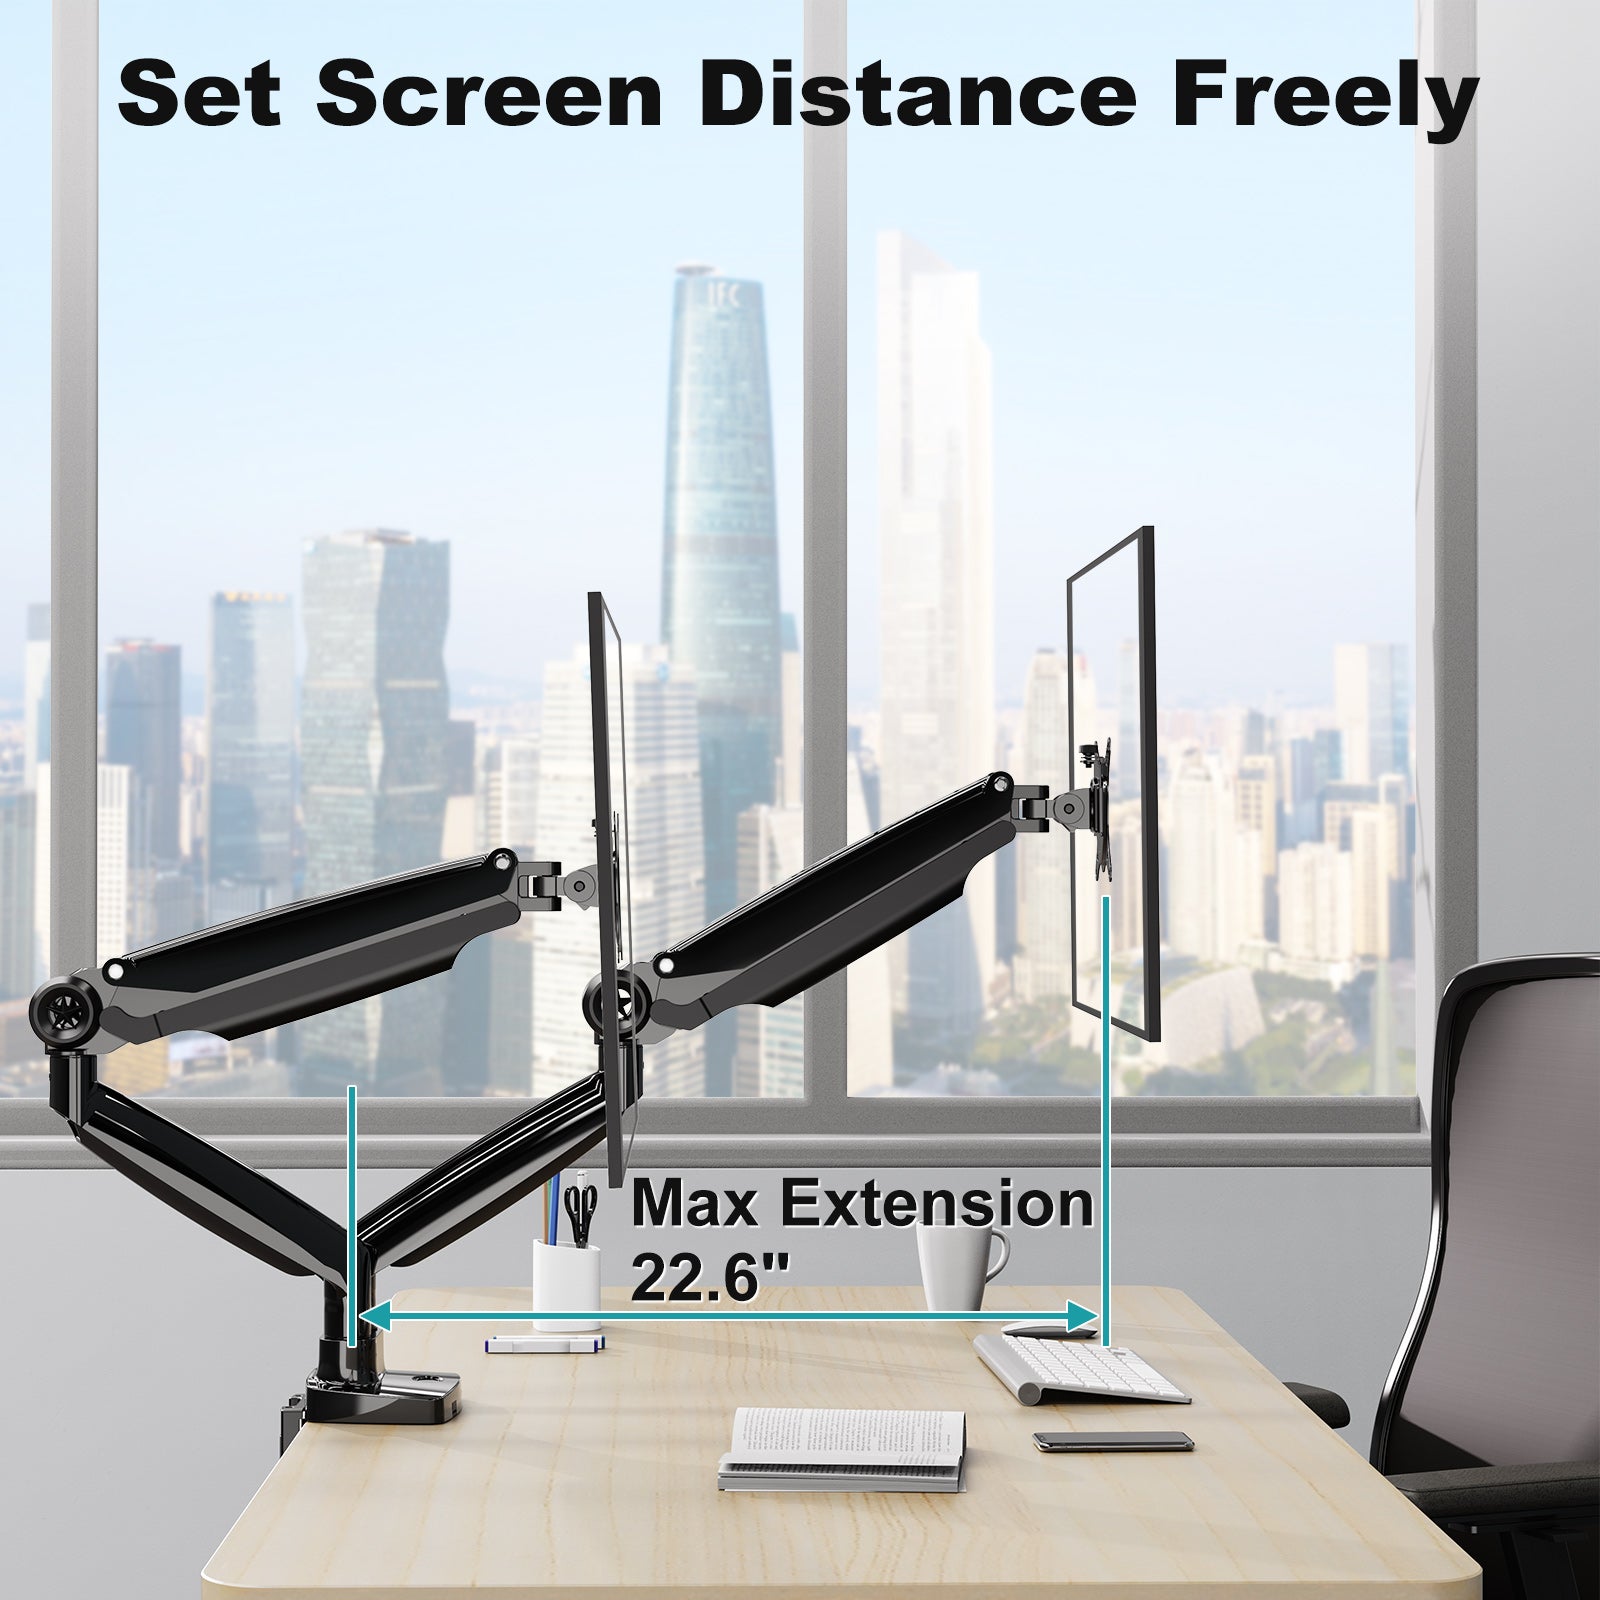 MOUNTUP Ultrawide Dual Monitor Desk Mount for Two Max 35 inch Monitors Extend and Retract